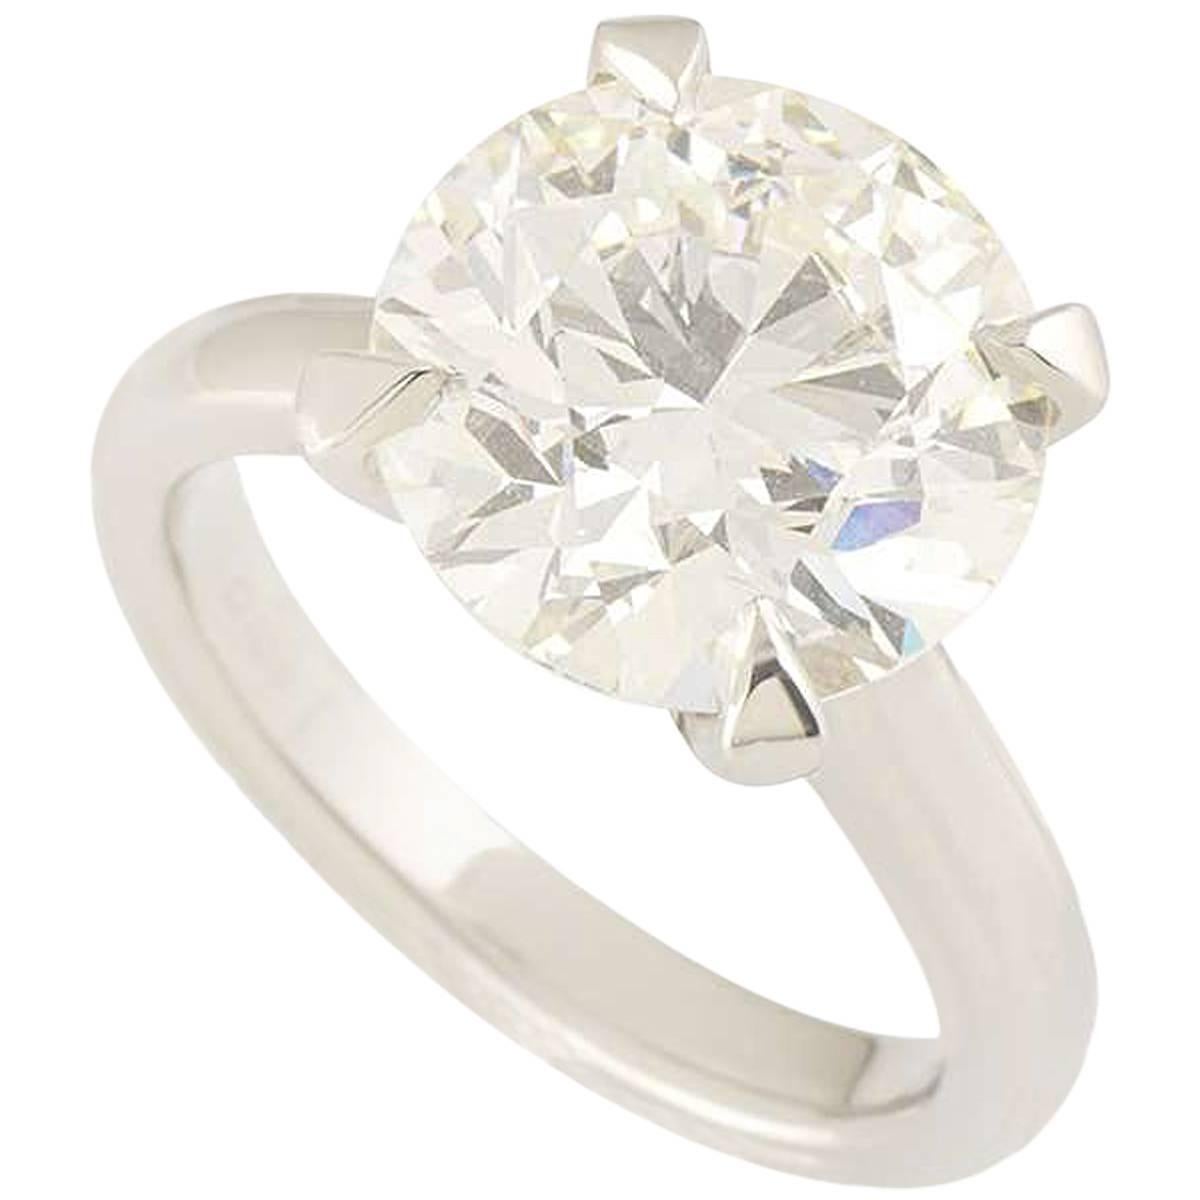 GIA Certified 5.46 Carat Round Brilliant Cut Diamond Engagement Ring For Sale